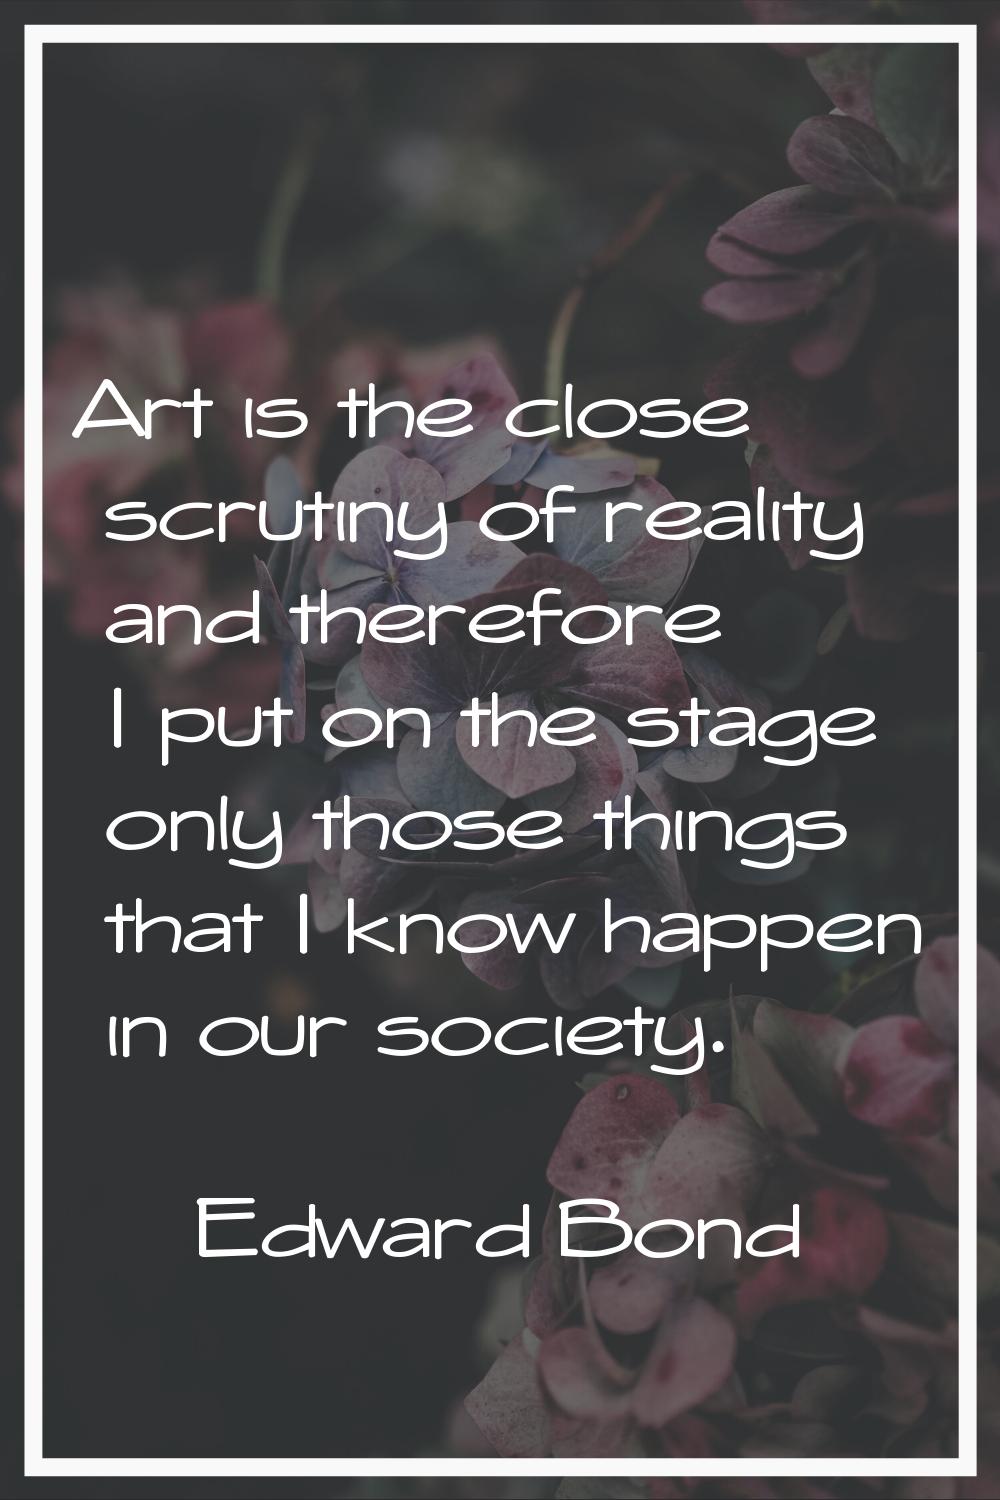 Art is the close scrutiny of reality and therefore I put on the stage only those things that I know